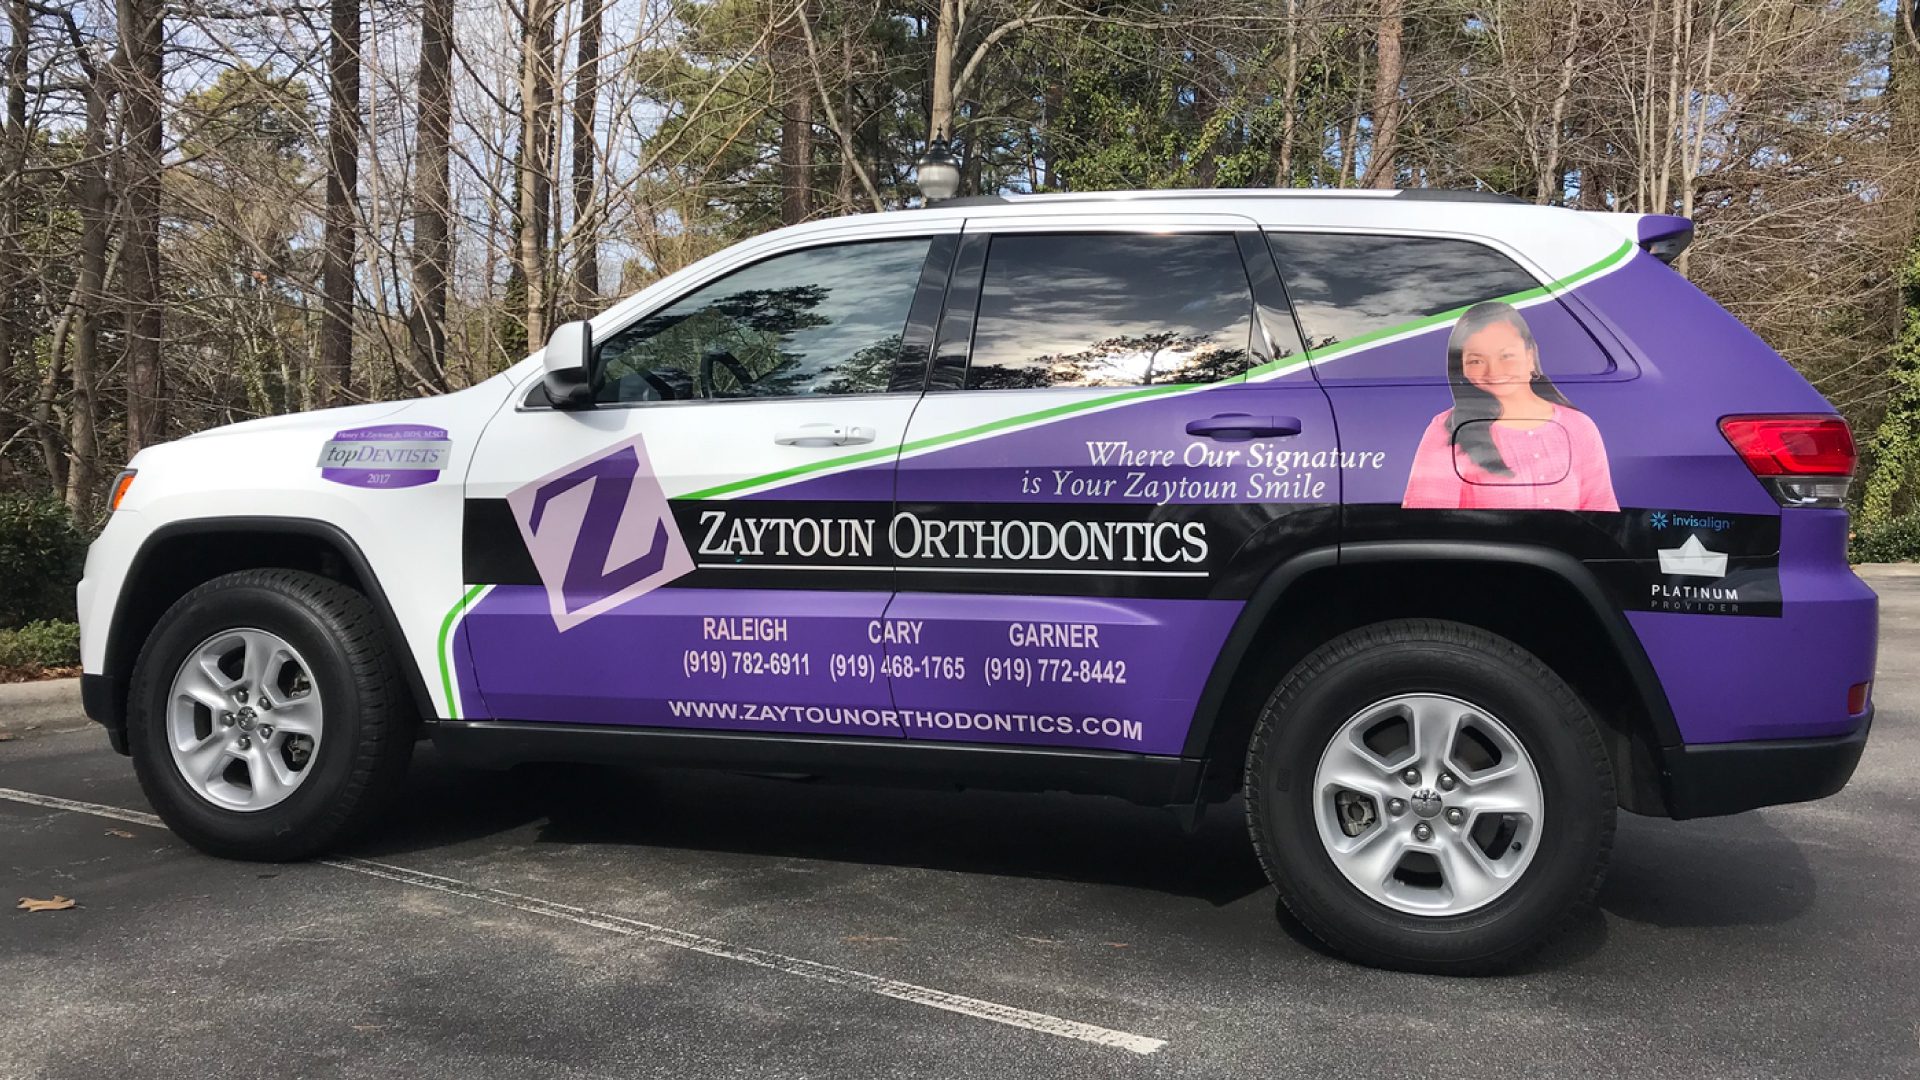 How effective is using vehicle wraps for marketing your business?